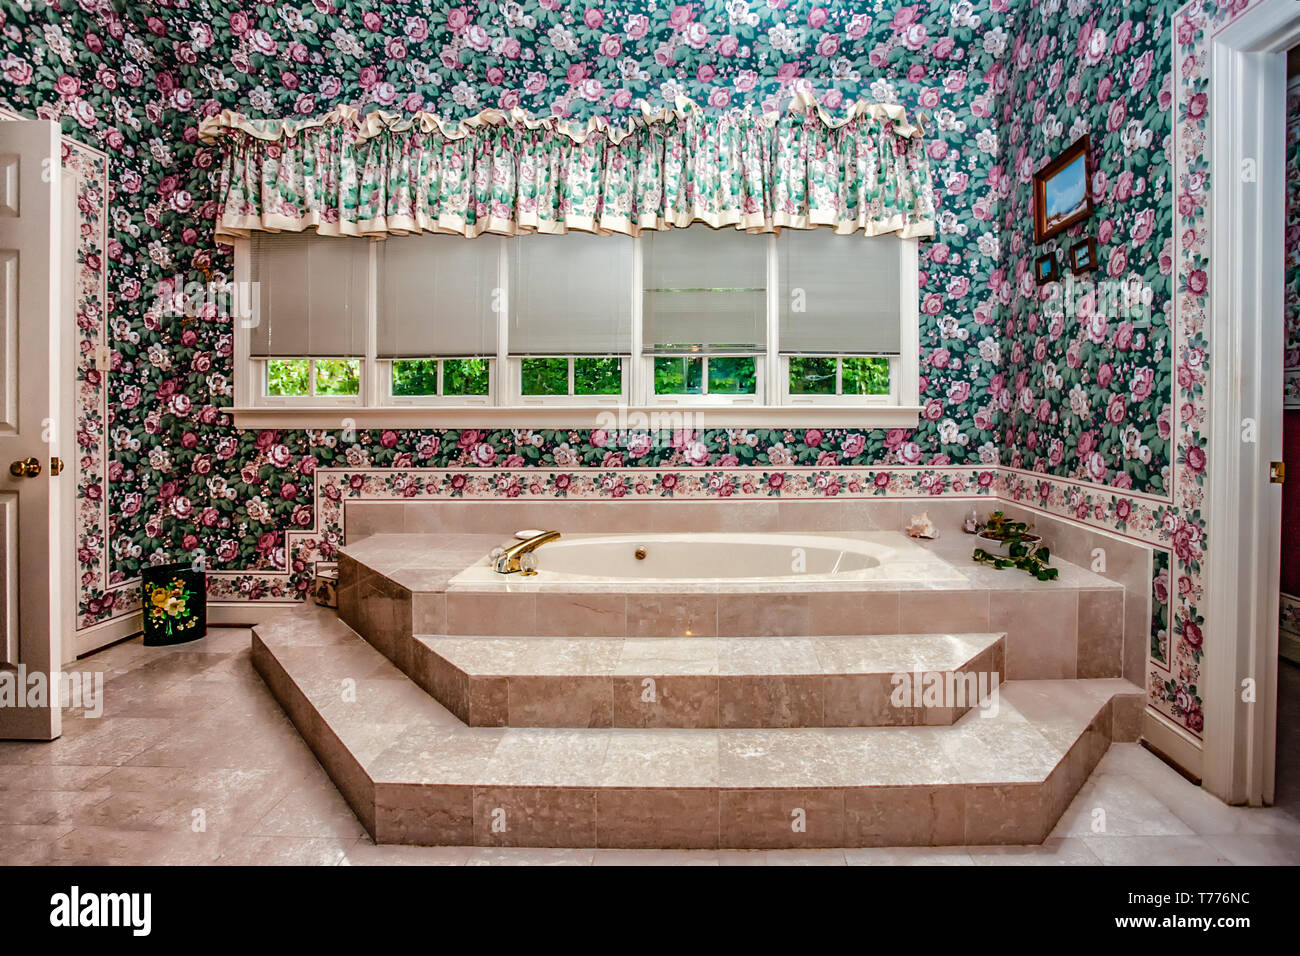 Bathroom with a floral motif. Stock Photo